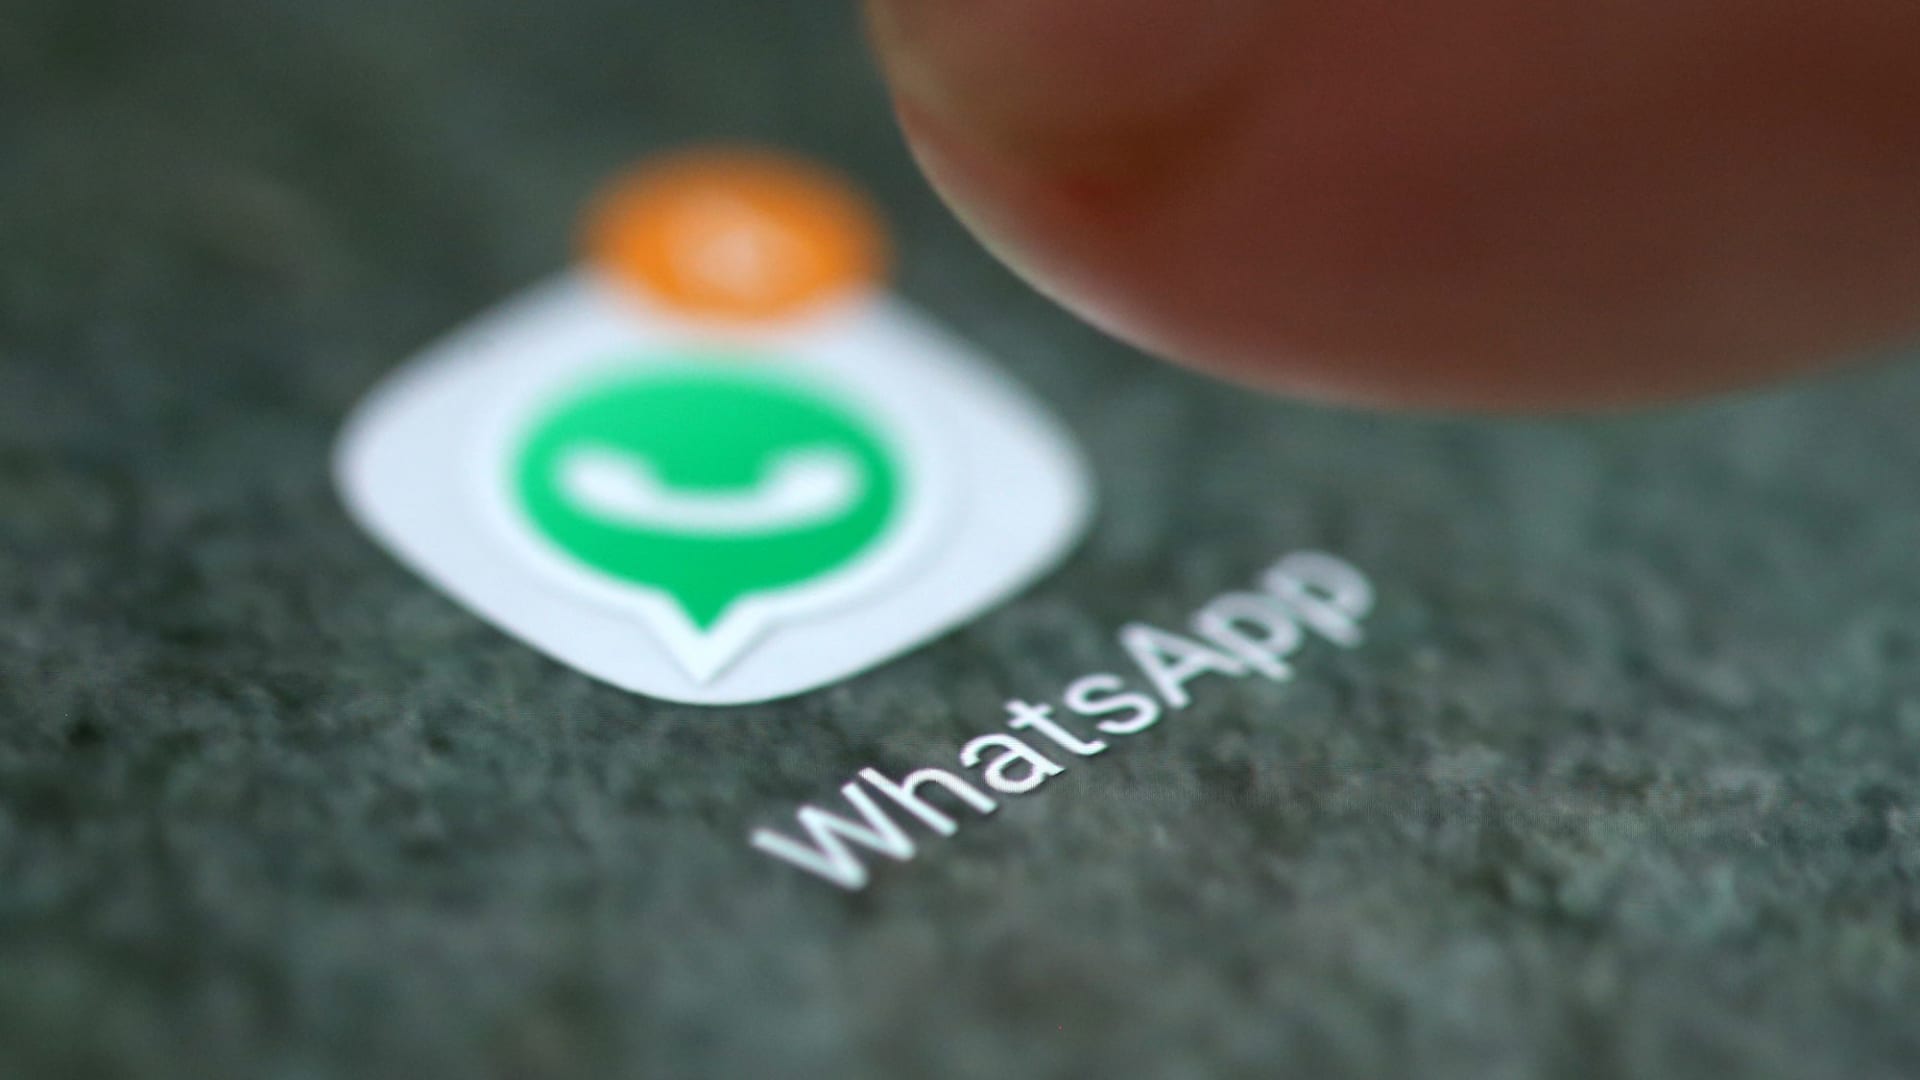 WhatsApp back online after global outage